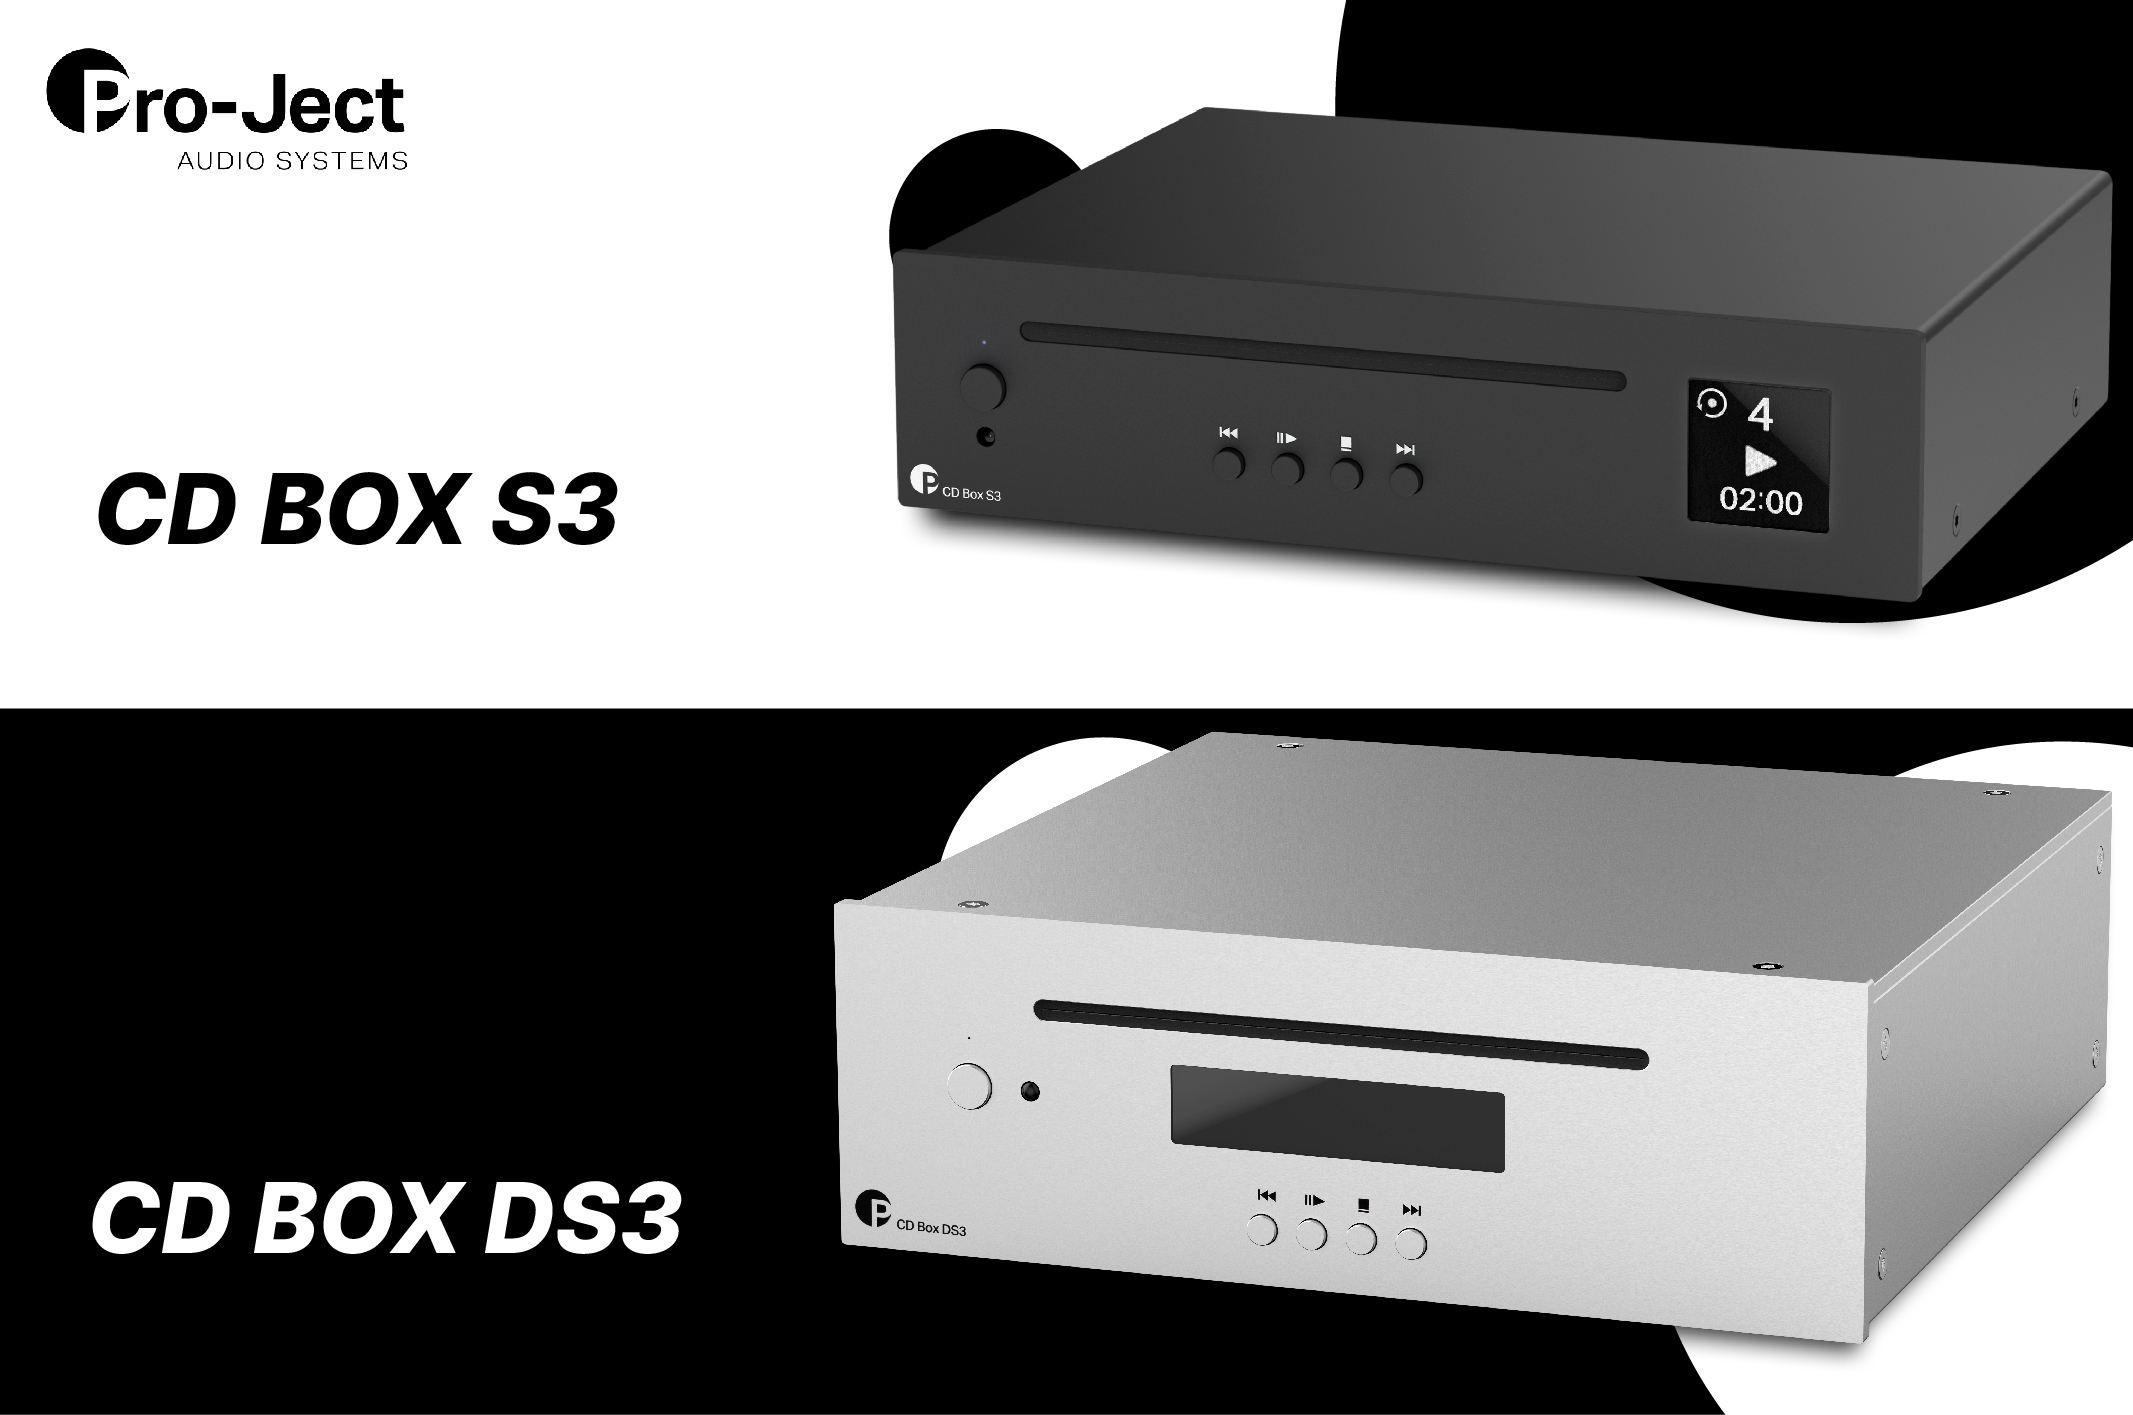 CD Box S3 – Pro-Ject Audio Systems